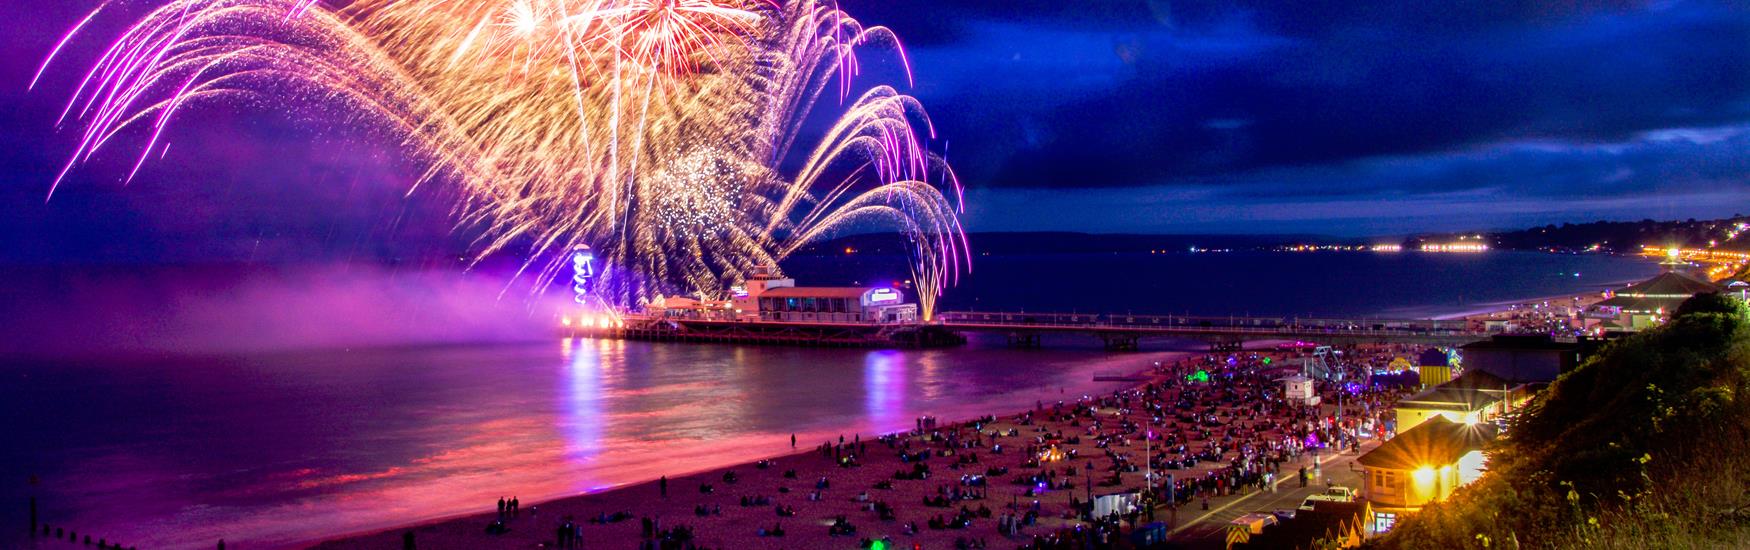 Bournemouth Friday Fireworks: 4, 11, 18 & 25 August